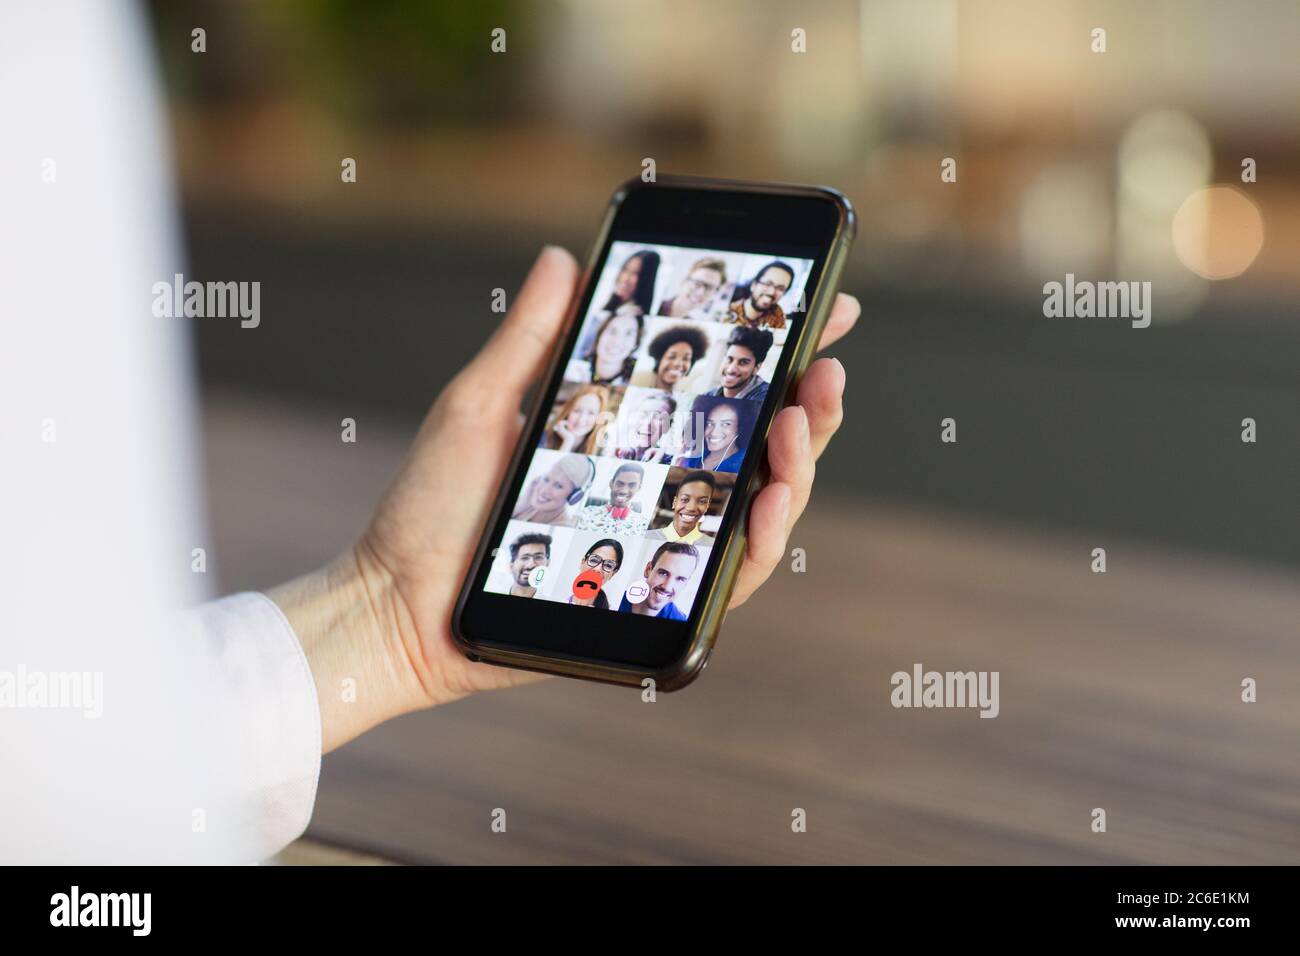 Friends video conferencing on smart phone screen Stock Photo